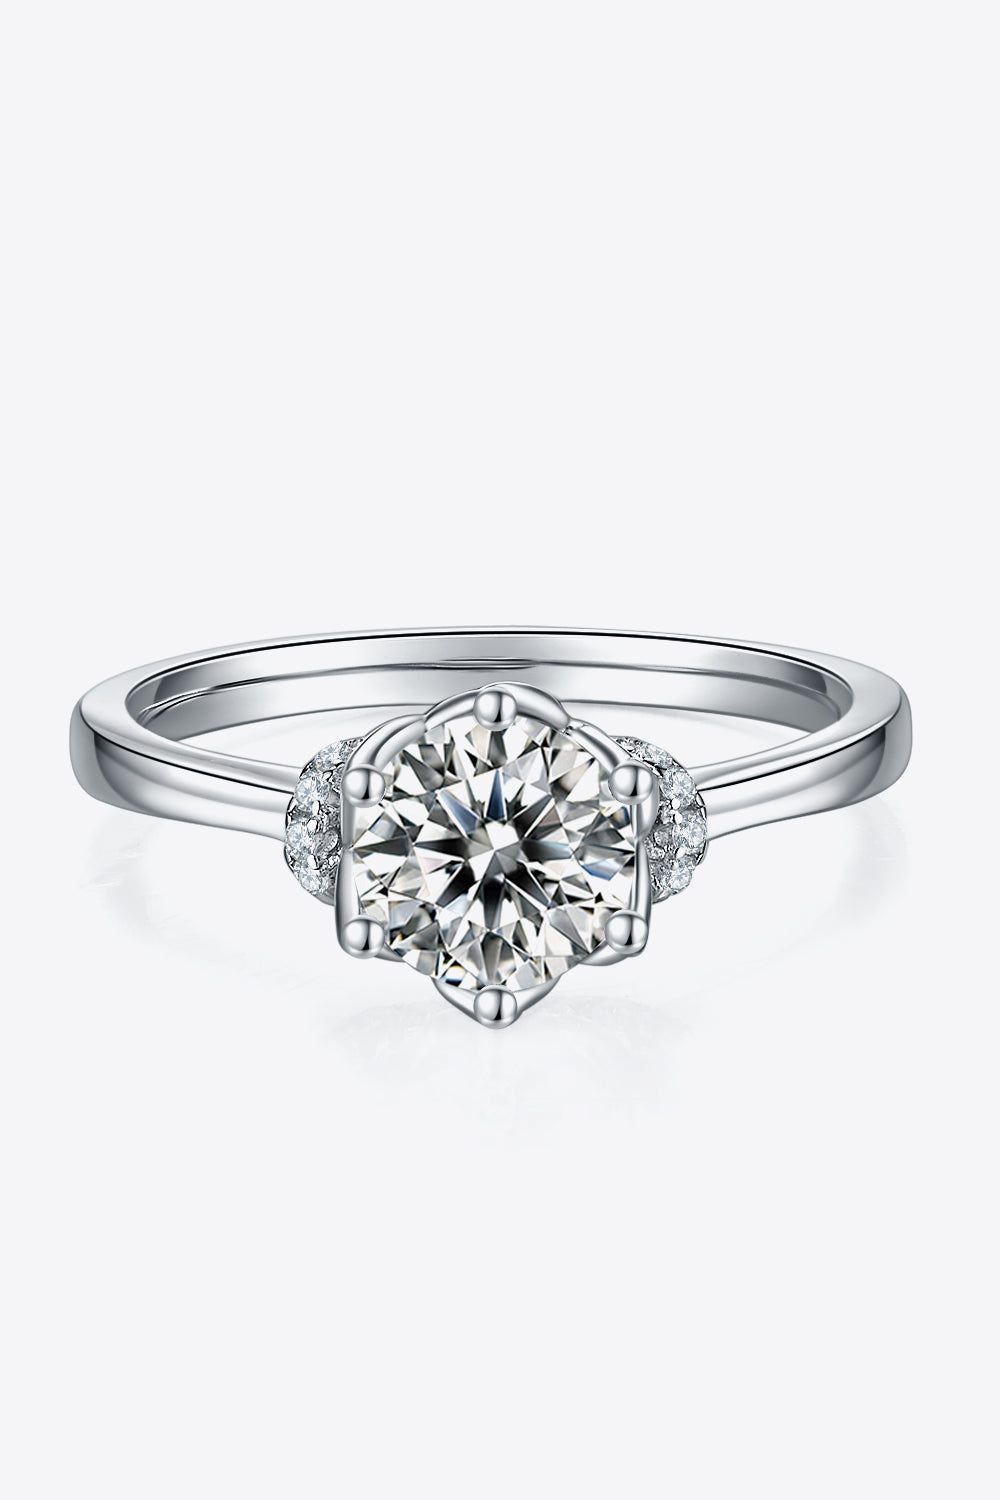 1 Carat Round Brilliant Cut Moissanite Platinum Over Pure Sterling Silver Ring - Sparkala